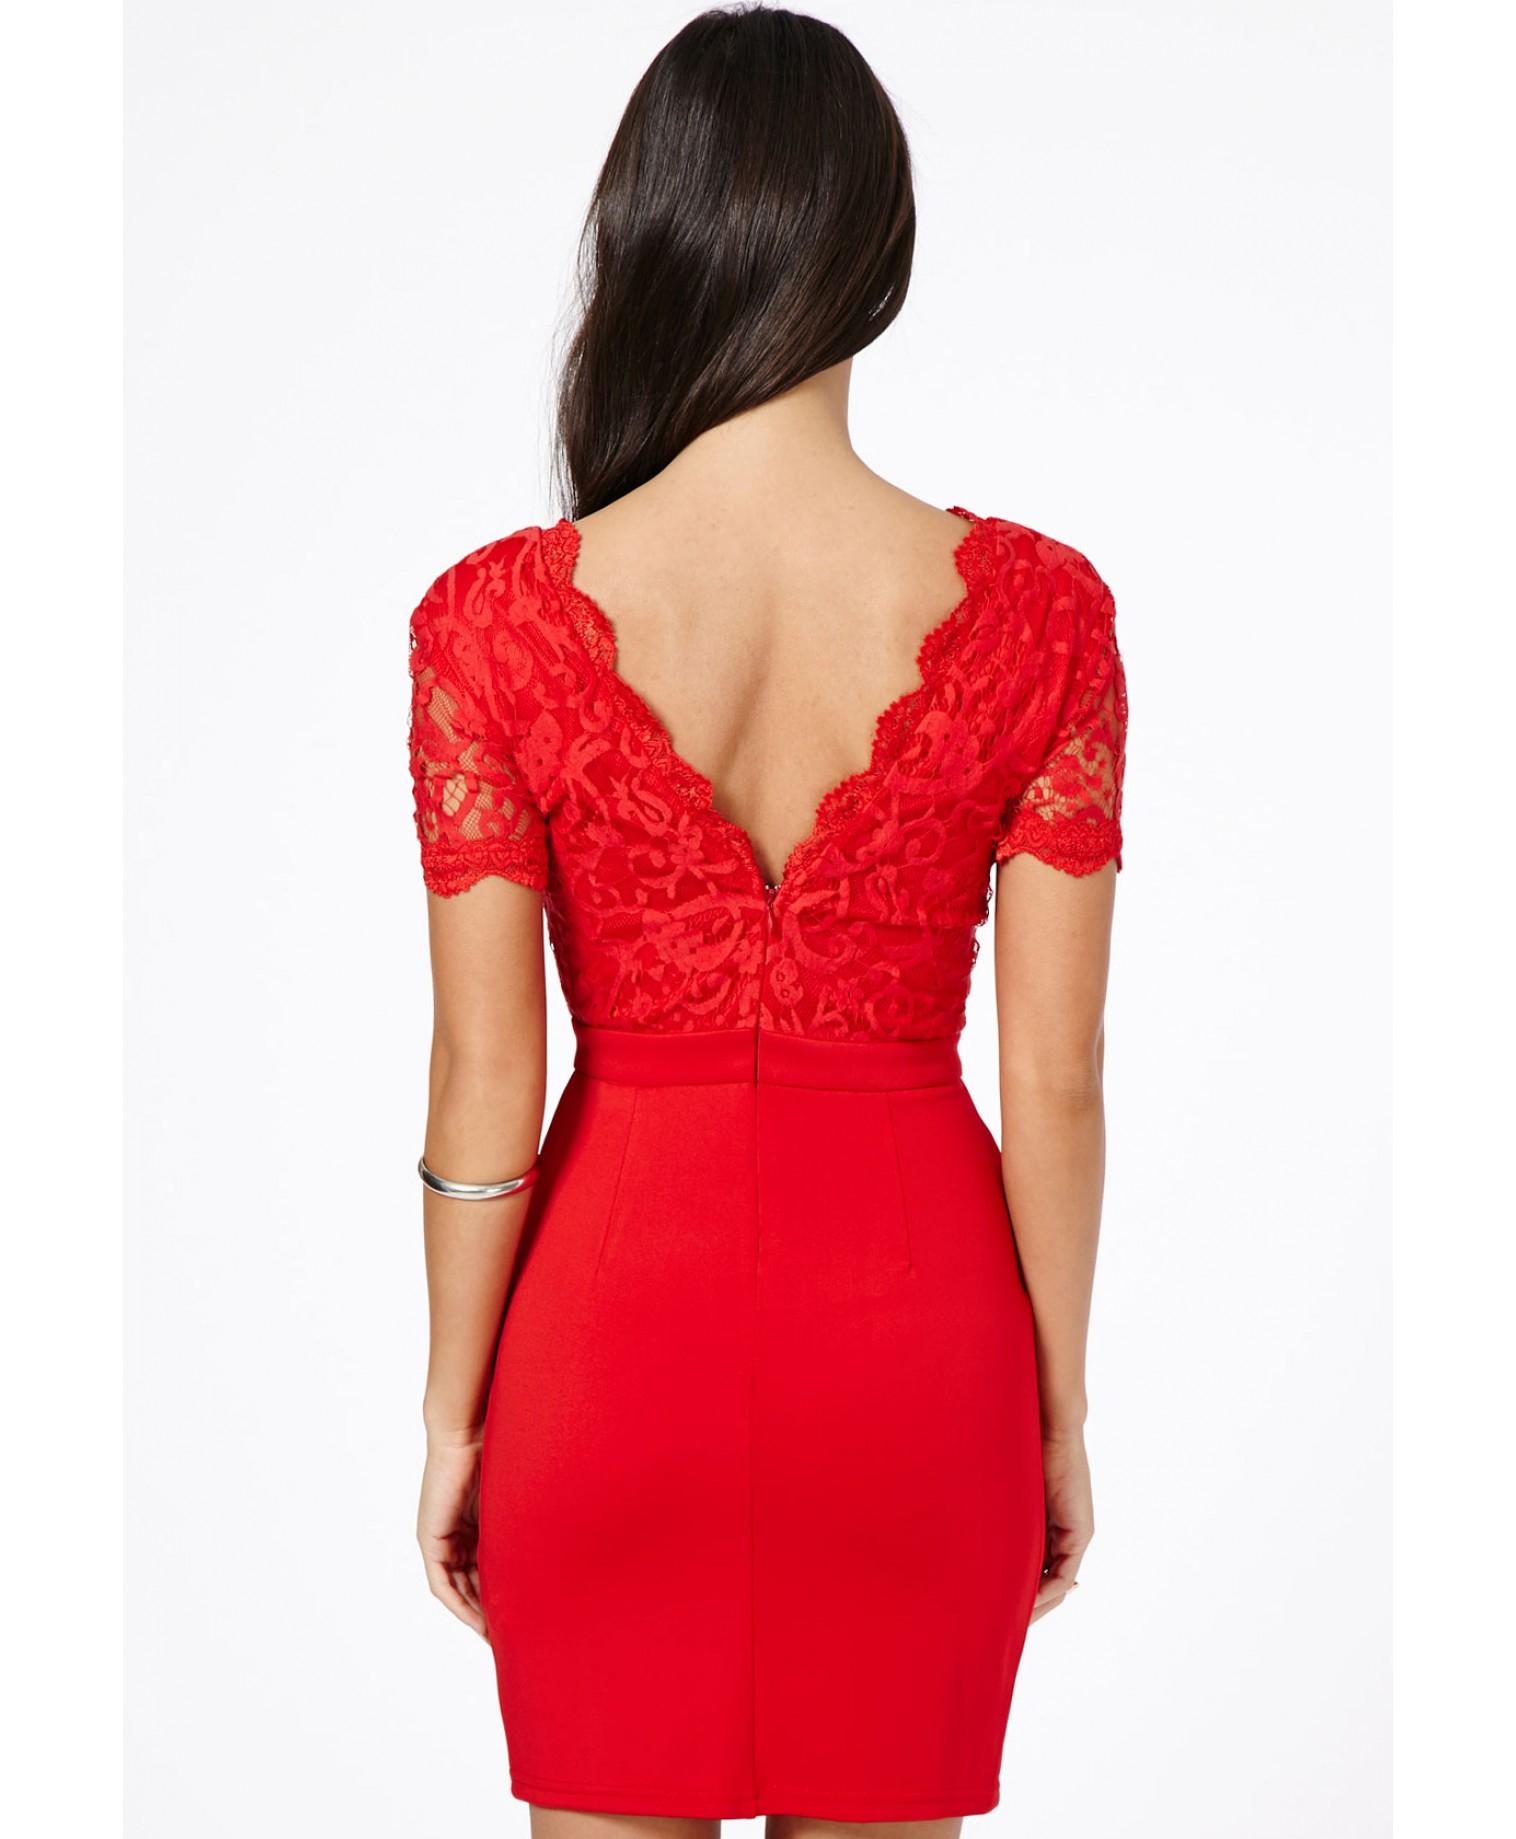 Missguided Risuka Red V-Neck Lace Mini Dress - Lyst